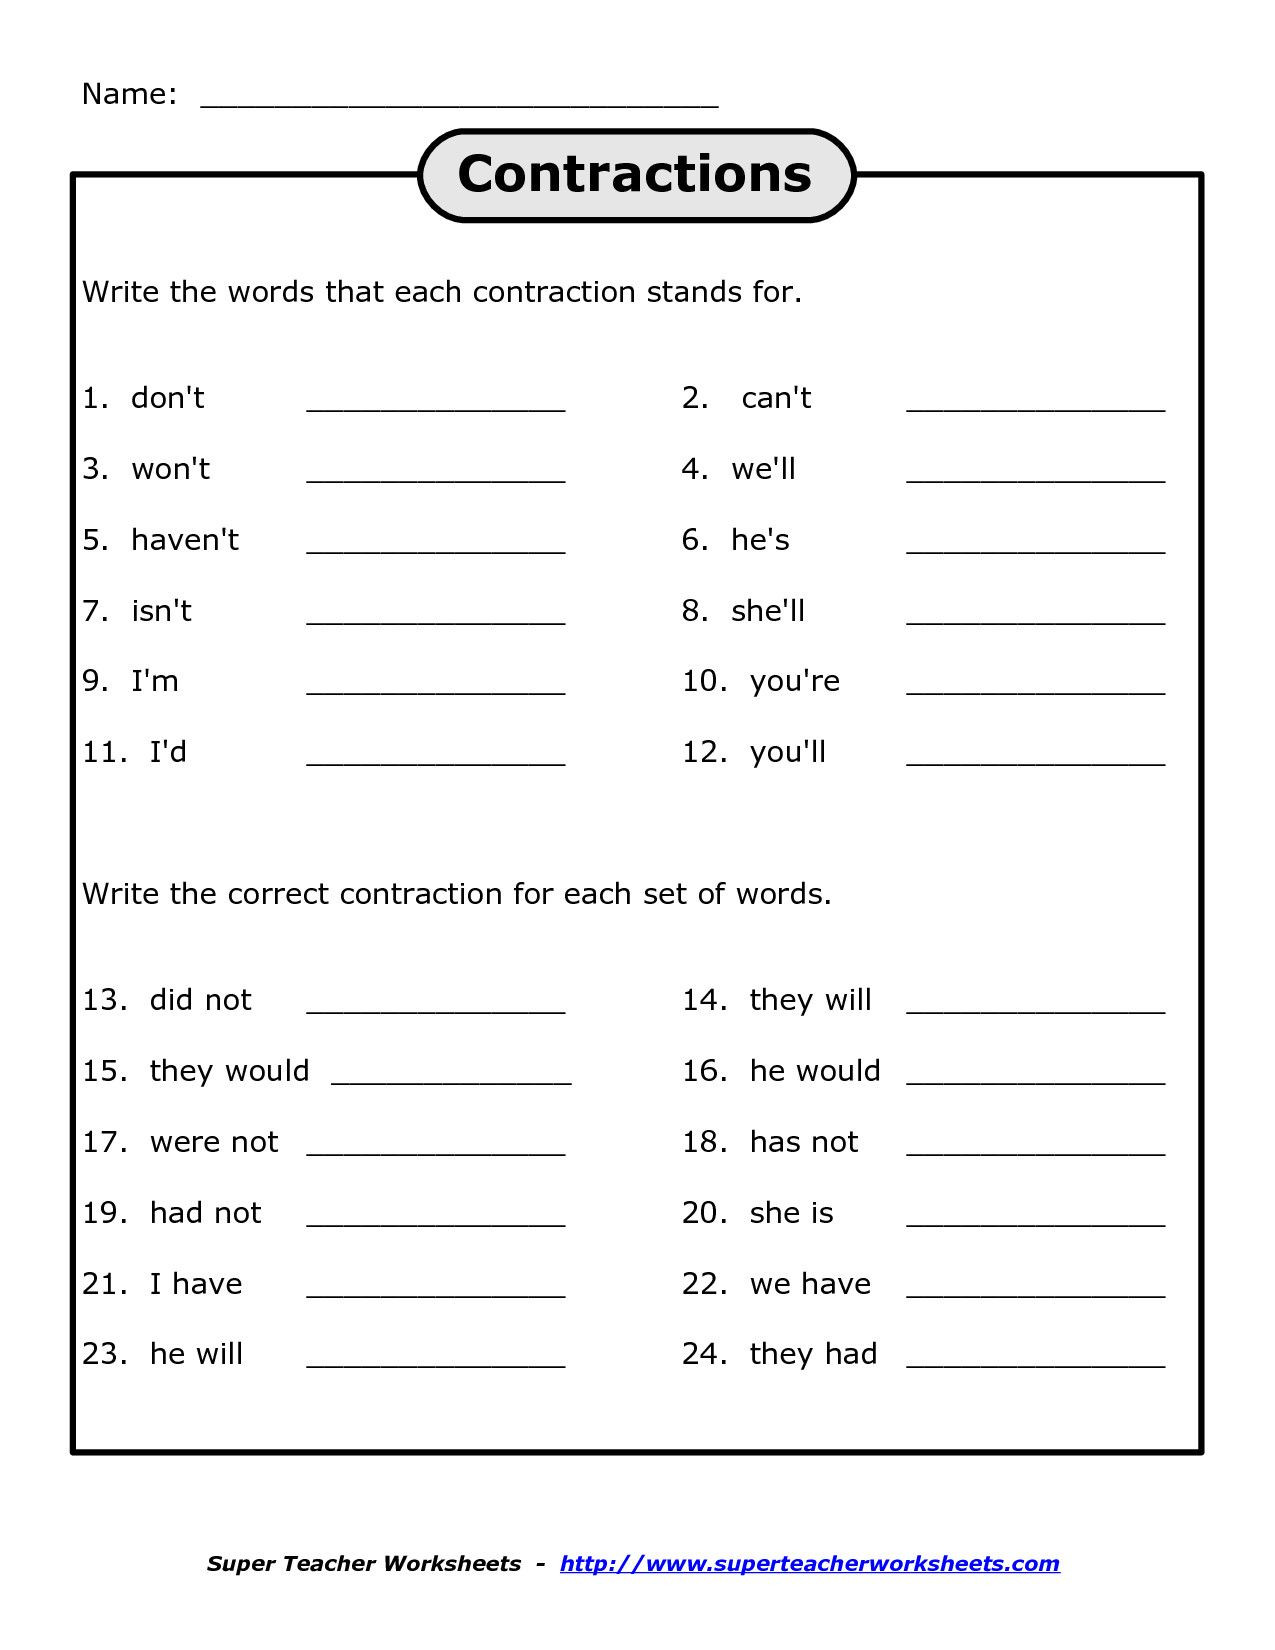 Contractions Worksheet 3rd Grade Pin On Dominic James